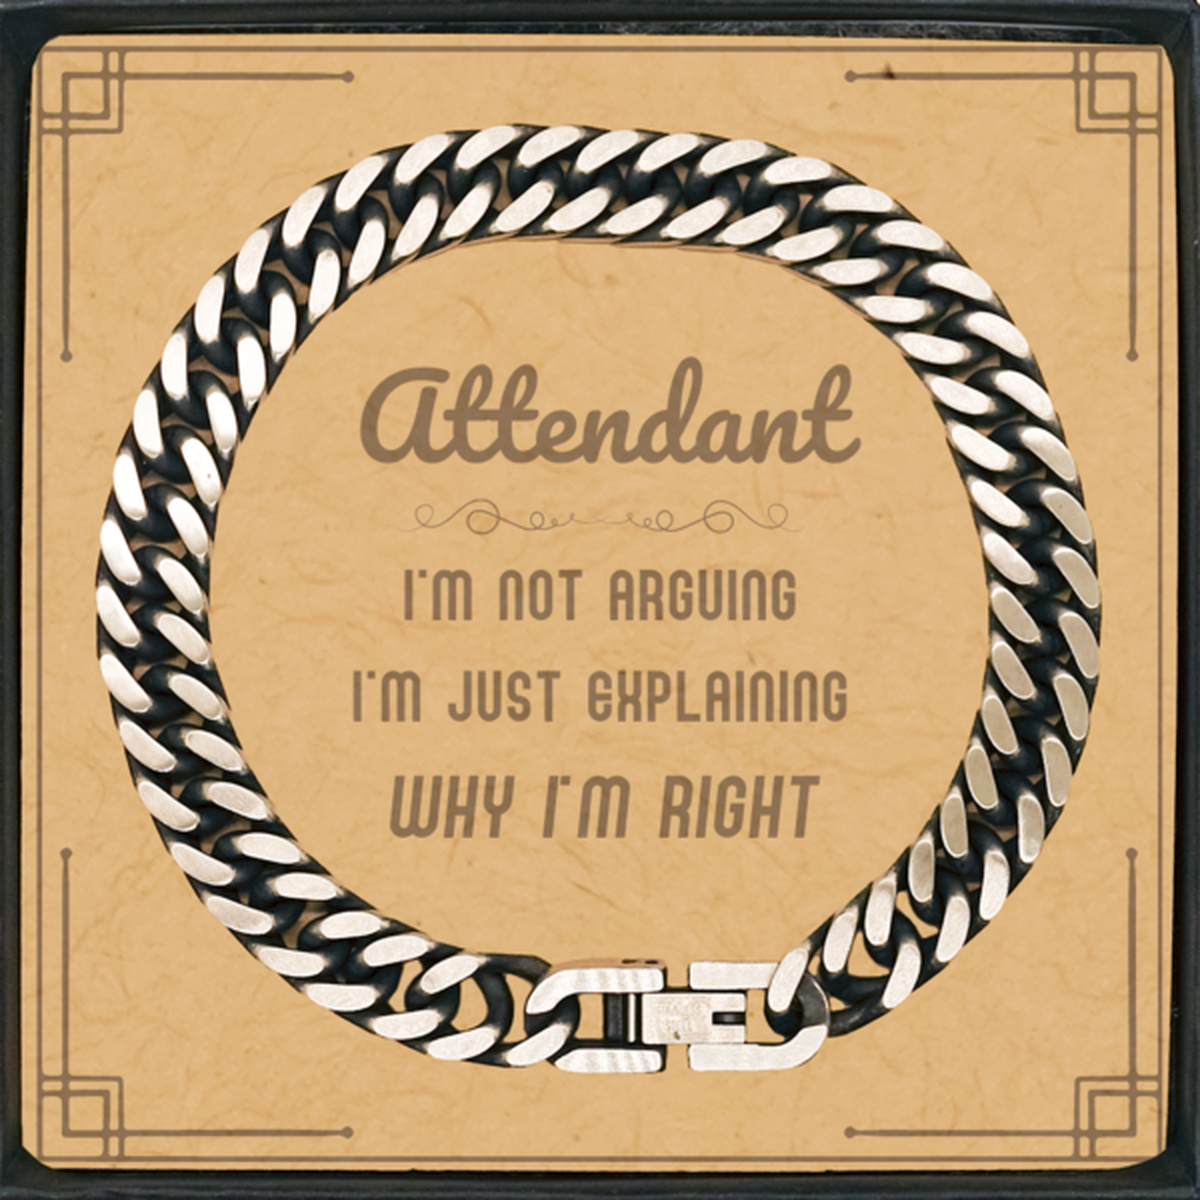 Attendant I'm not Arguing. I'm Just Explaining Why I'm RIGHT Cuban Link Chain Bracelet, Funny Saying Quote Attendant Gifts For Attendant Message Card Graduation Birthday Christmas Gifts for Men Women Coworker